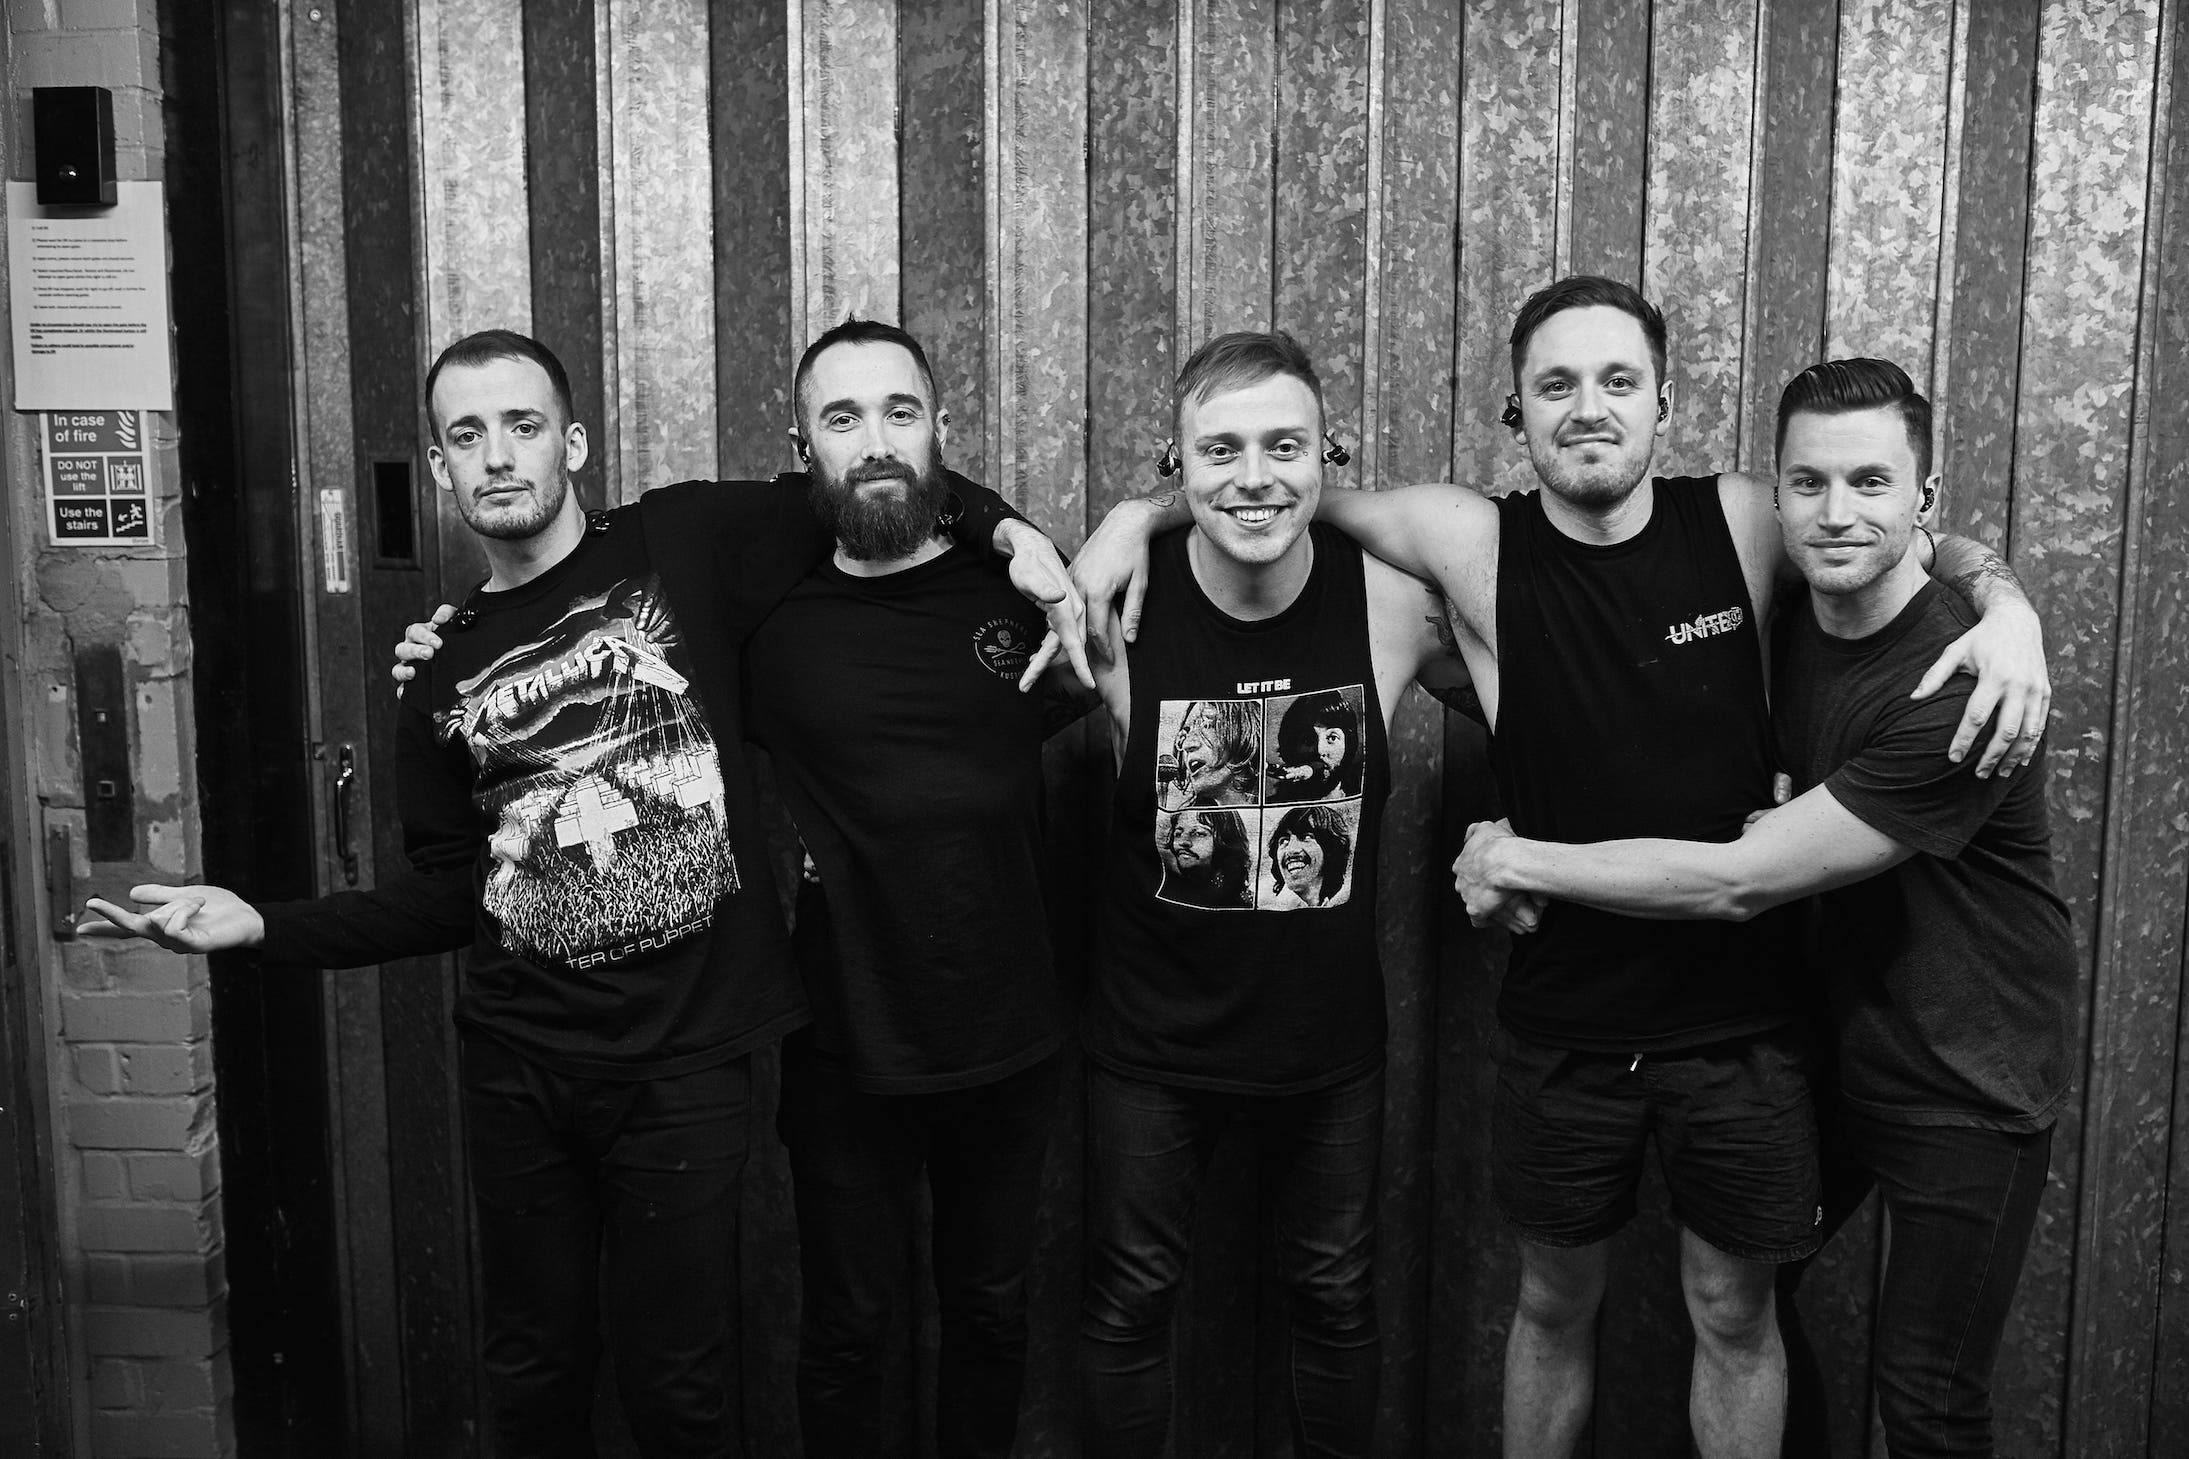 Check Out Our Photo Gallery From Architects' Alexandra Palace Show